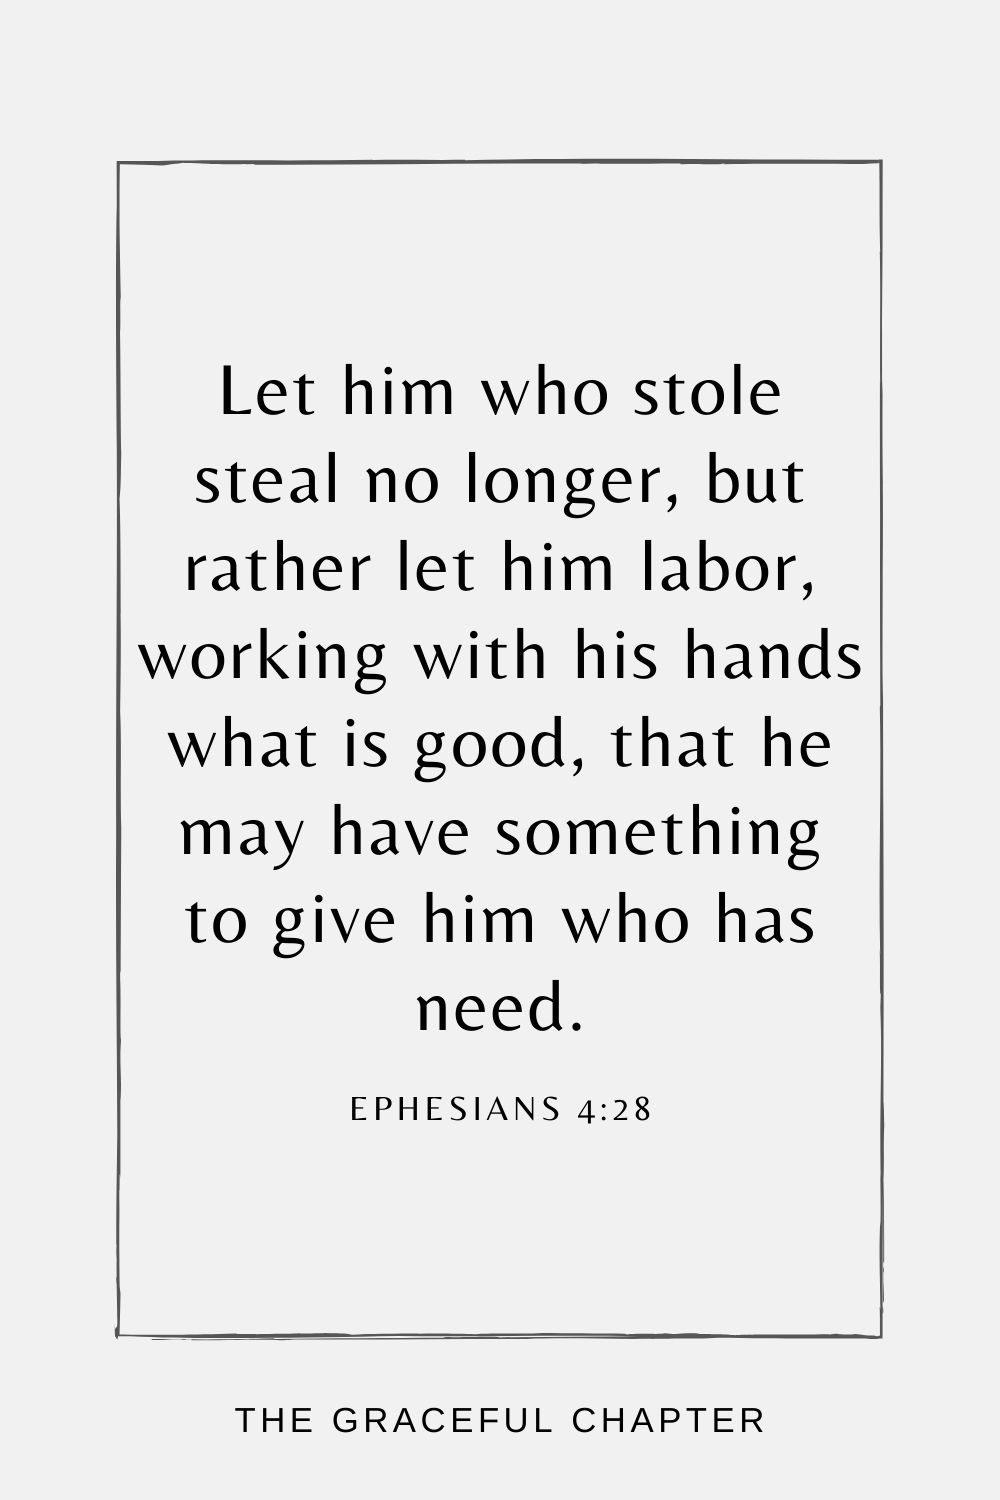 Let him who stole steal no longer, but rather let him labor, working with his hands what is good, that he may have something to give him who has need. Ephesians 4:28